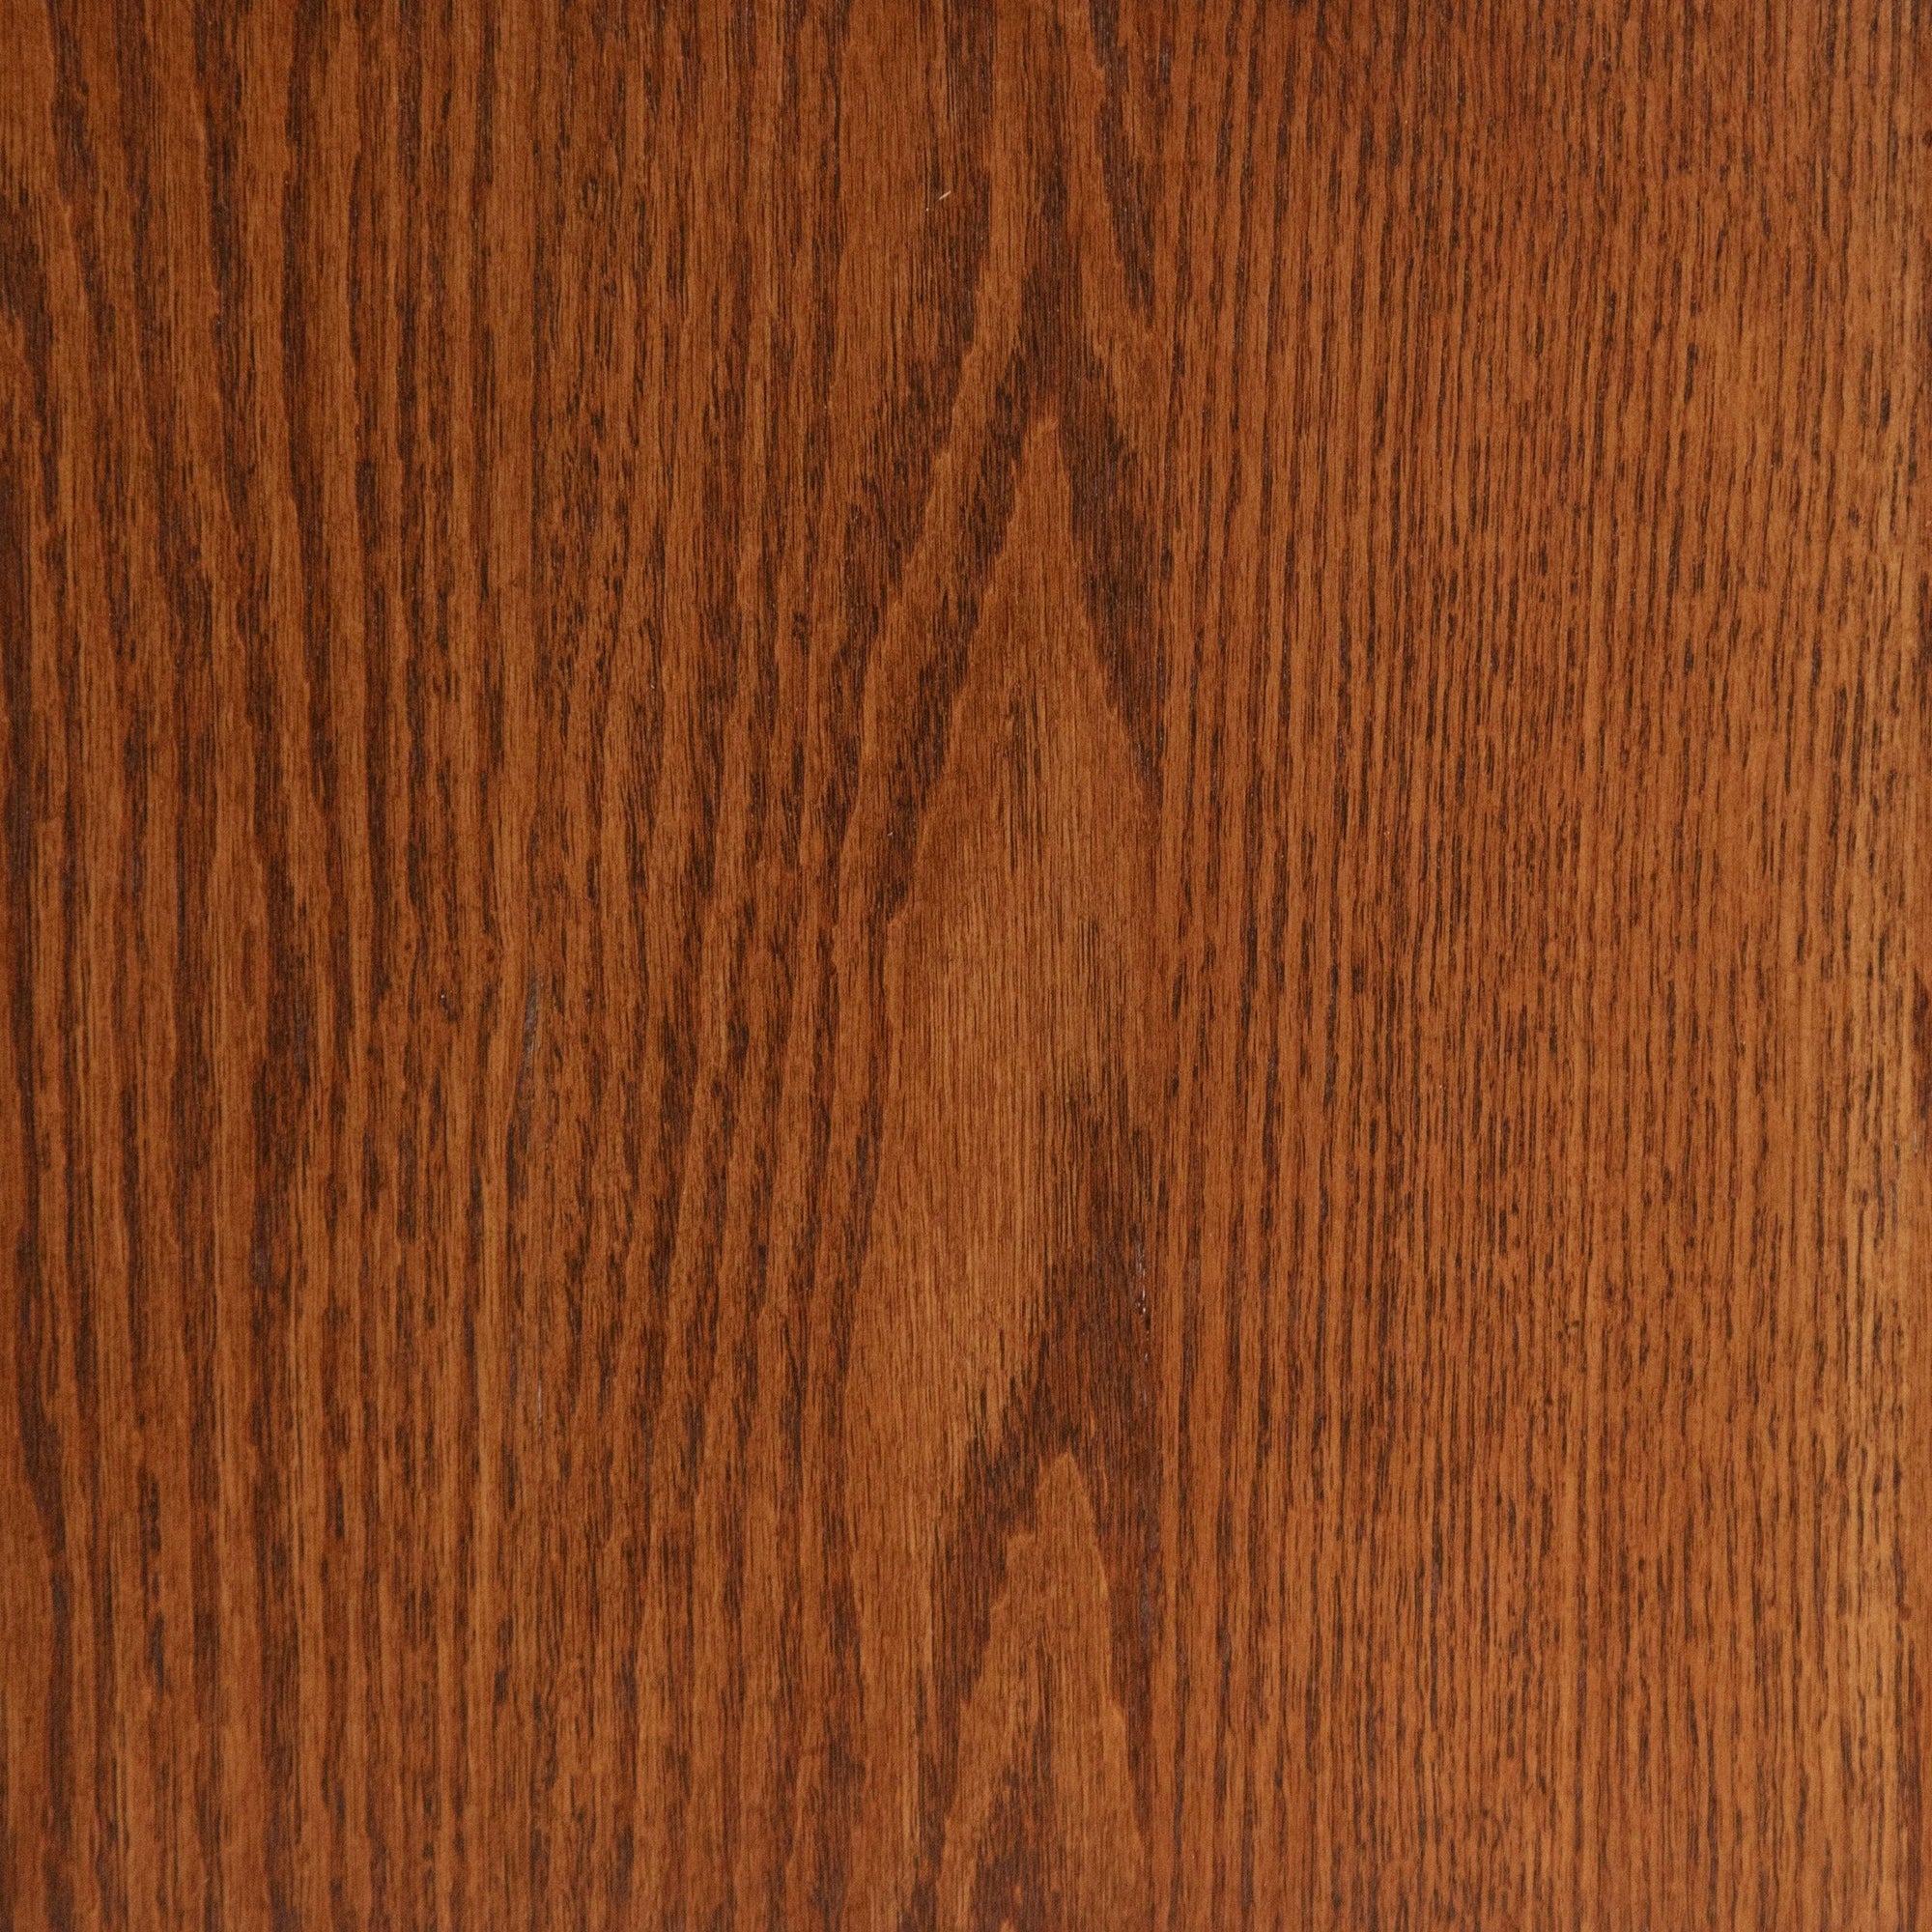 Caramel Stained Red Oak - ROMI DESIGN